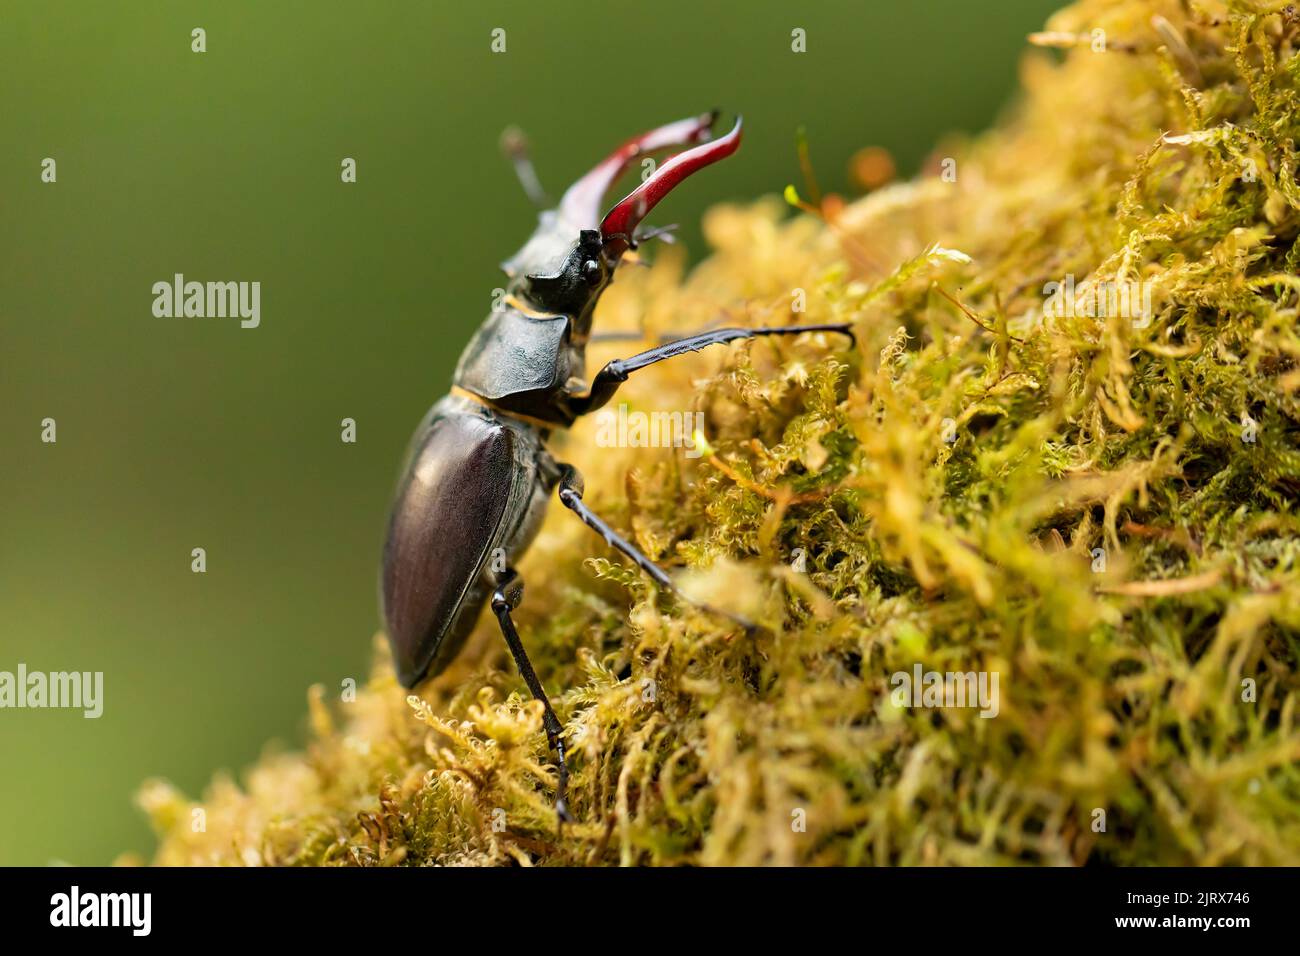 Male stag beetle, Lucanus cervus, with enlarge mandible on mossy tree, largest beetle in Europe Stock Photo